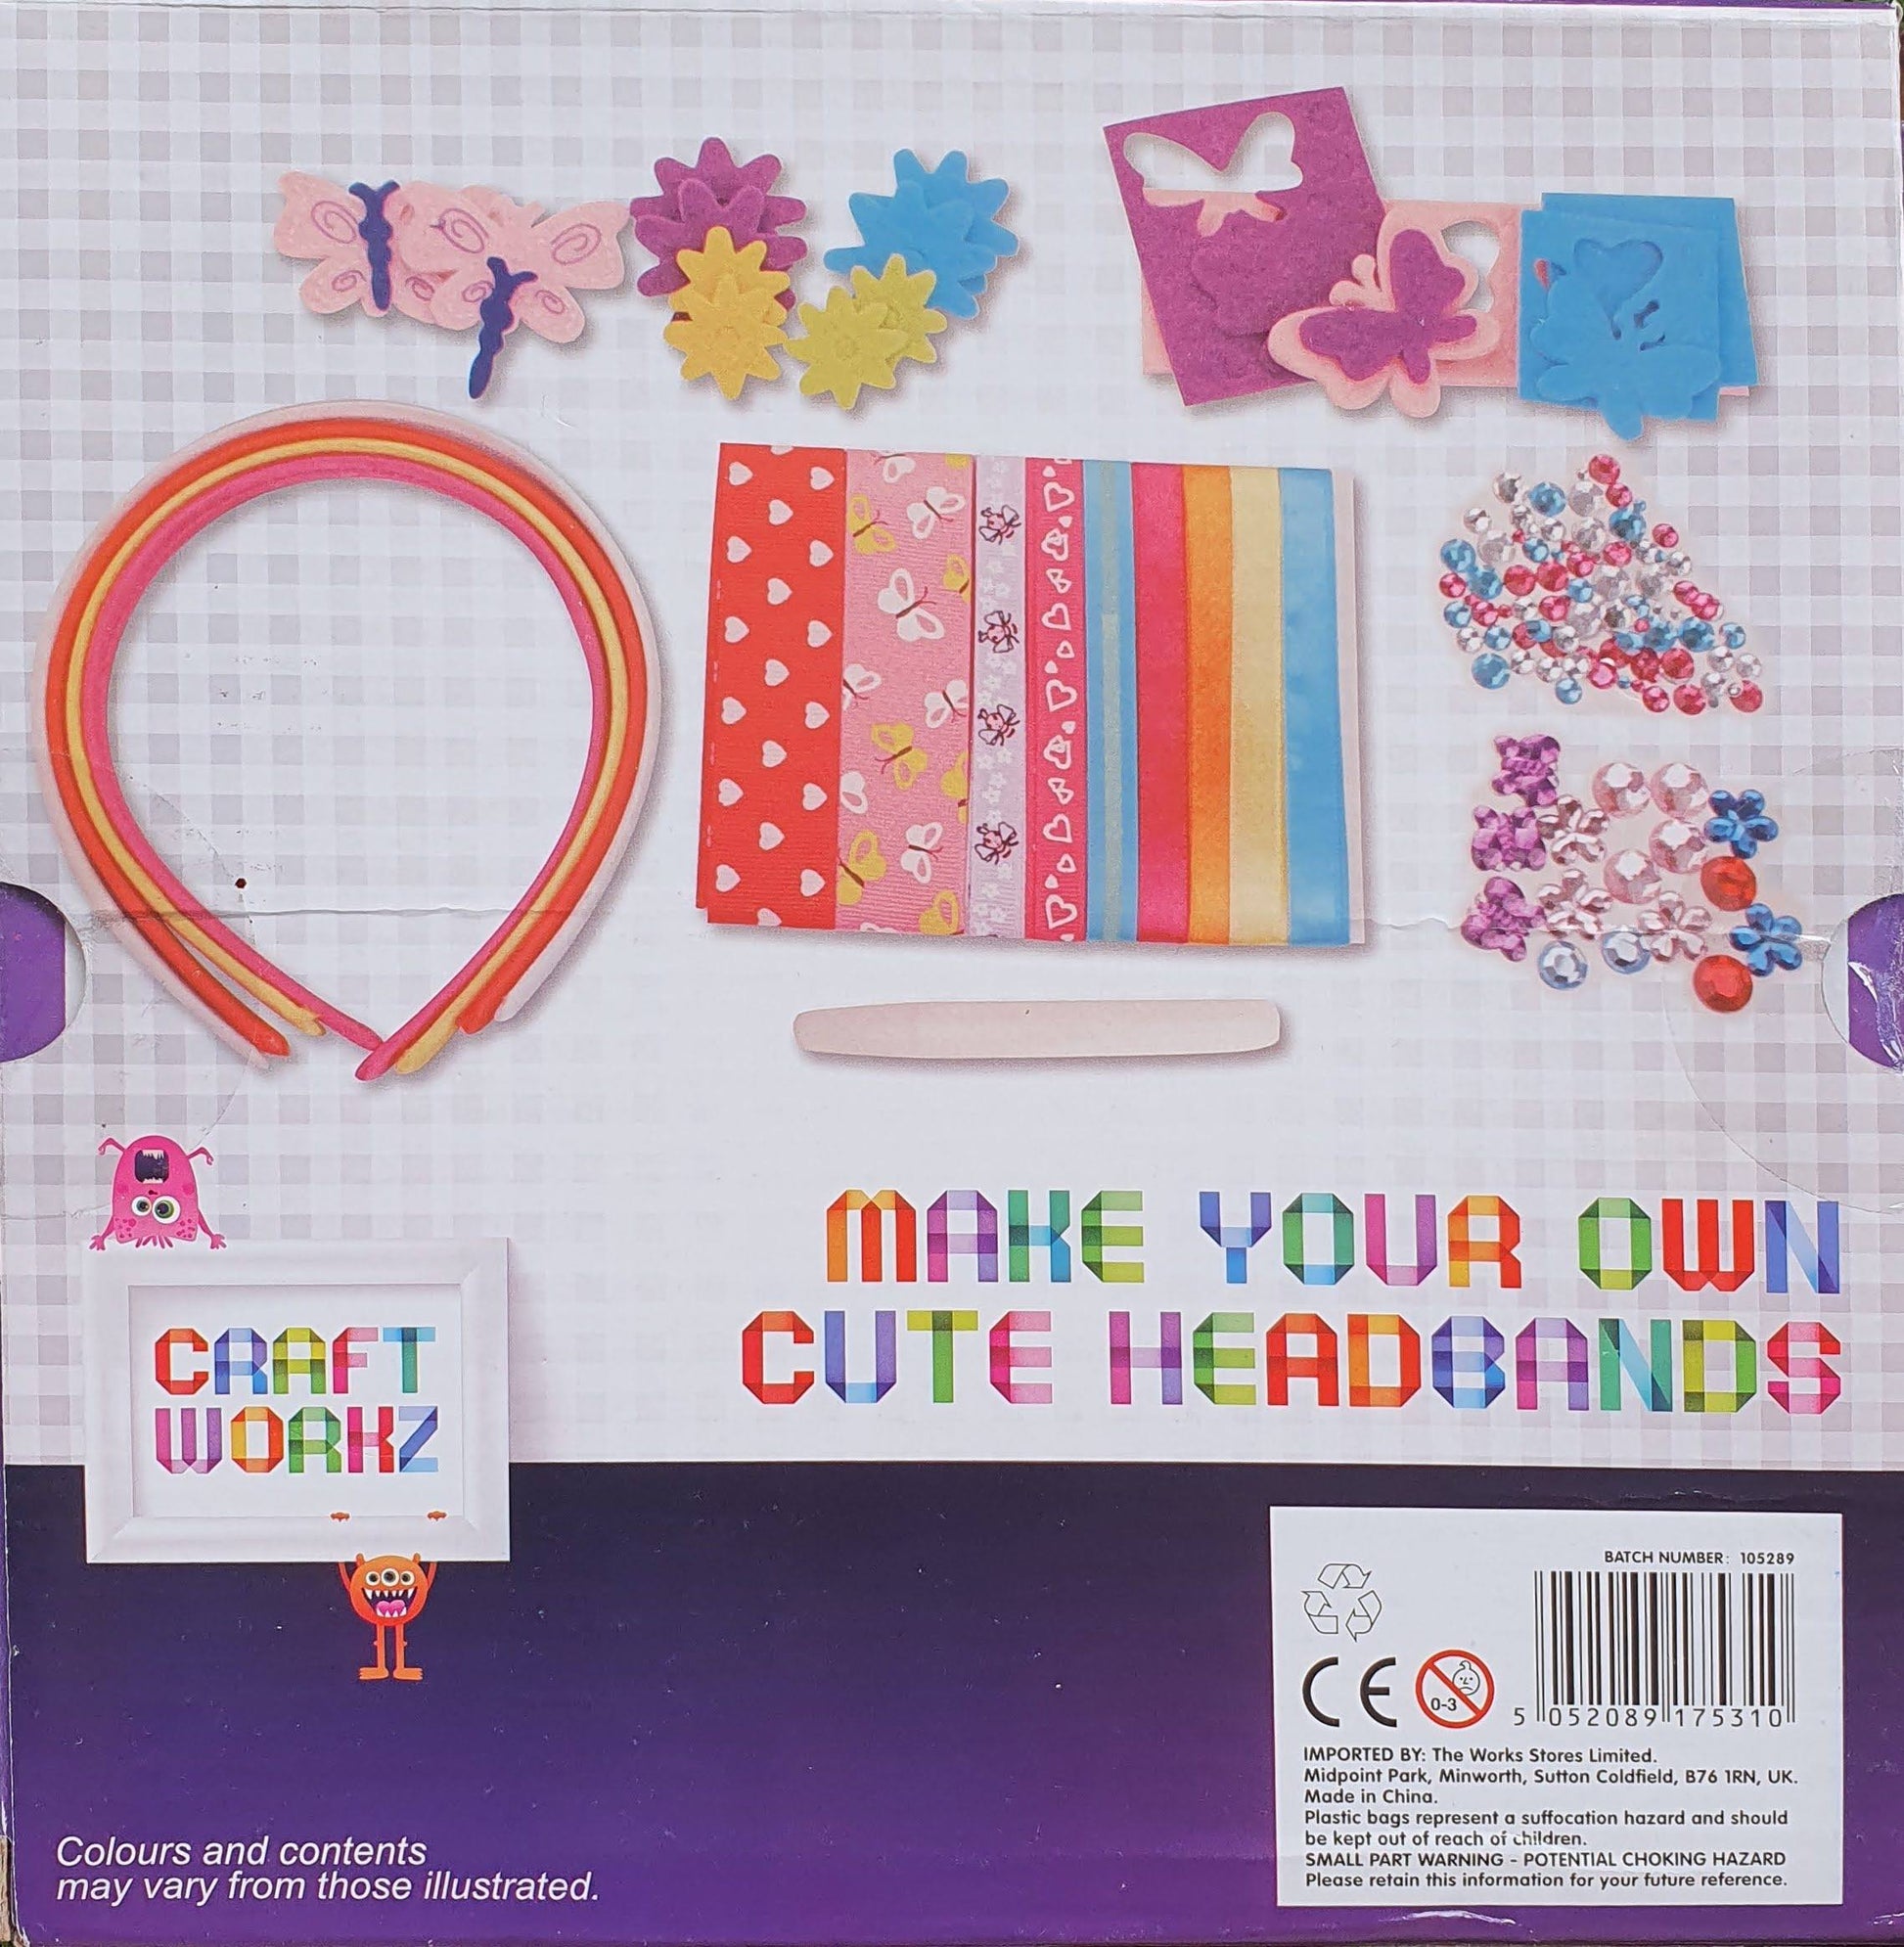 Make your own Headbands New, Age 6+ The Gift Box Project  (7002538868921)